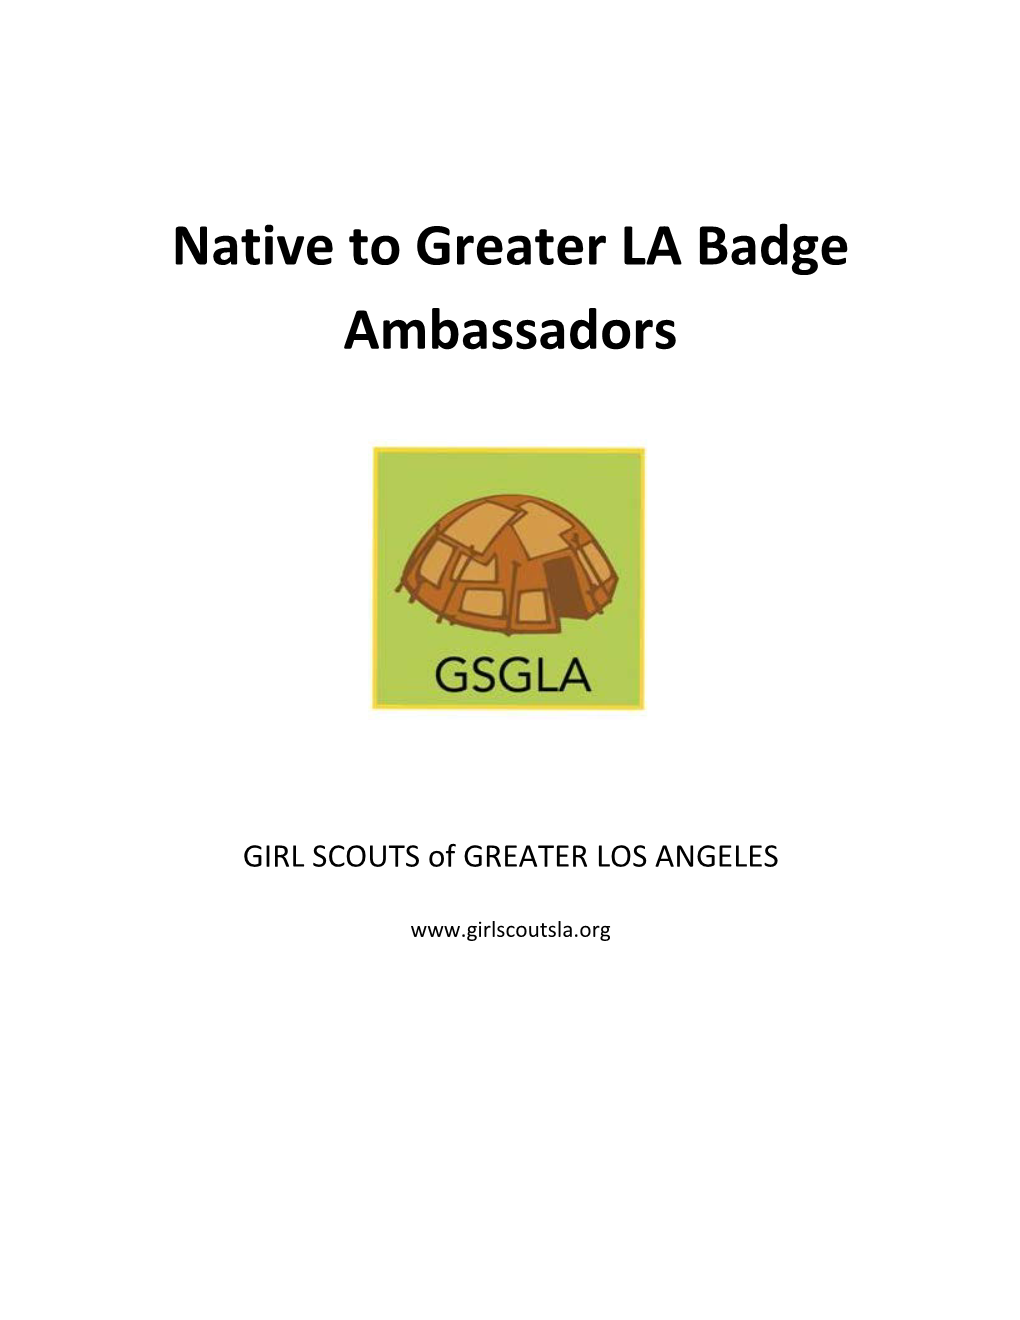 Native of Greater Los Angeles